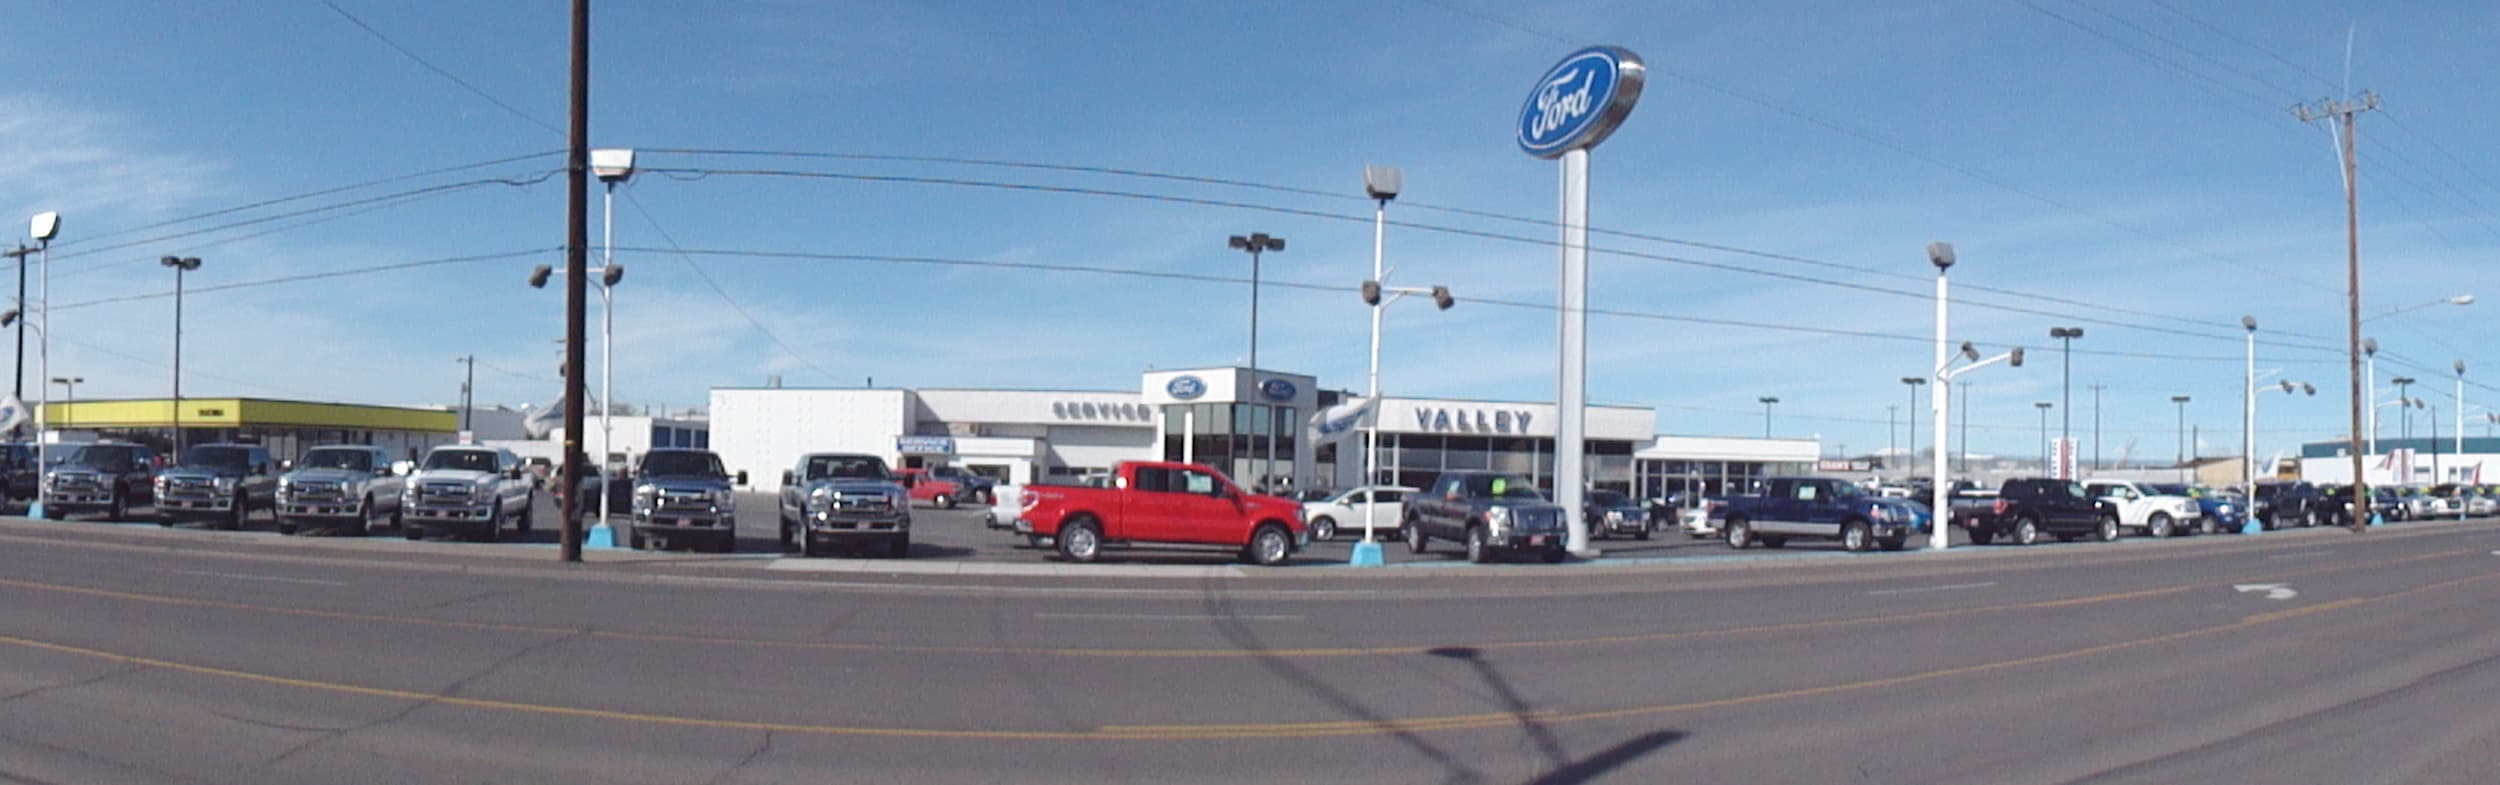 Valley ford nissan yakima #1